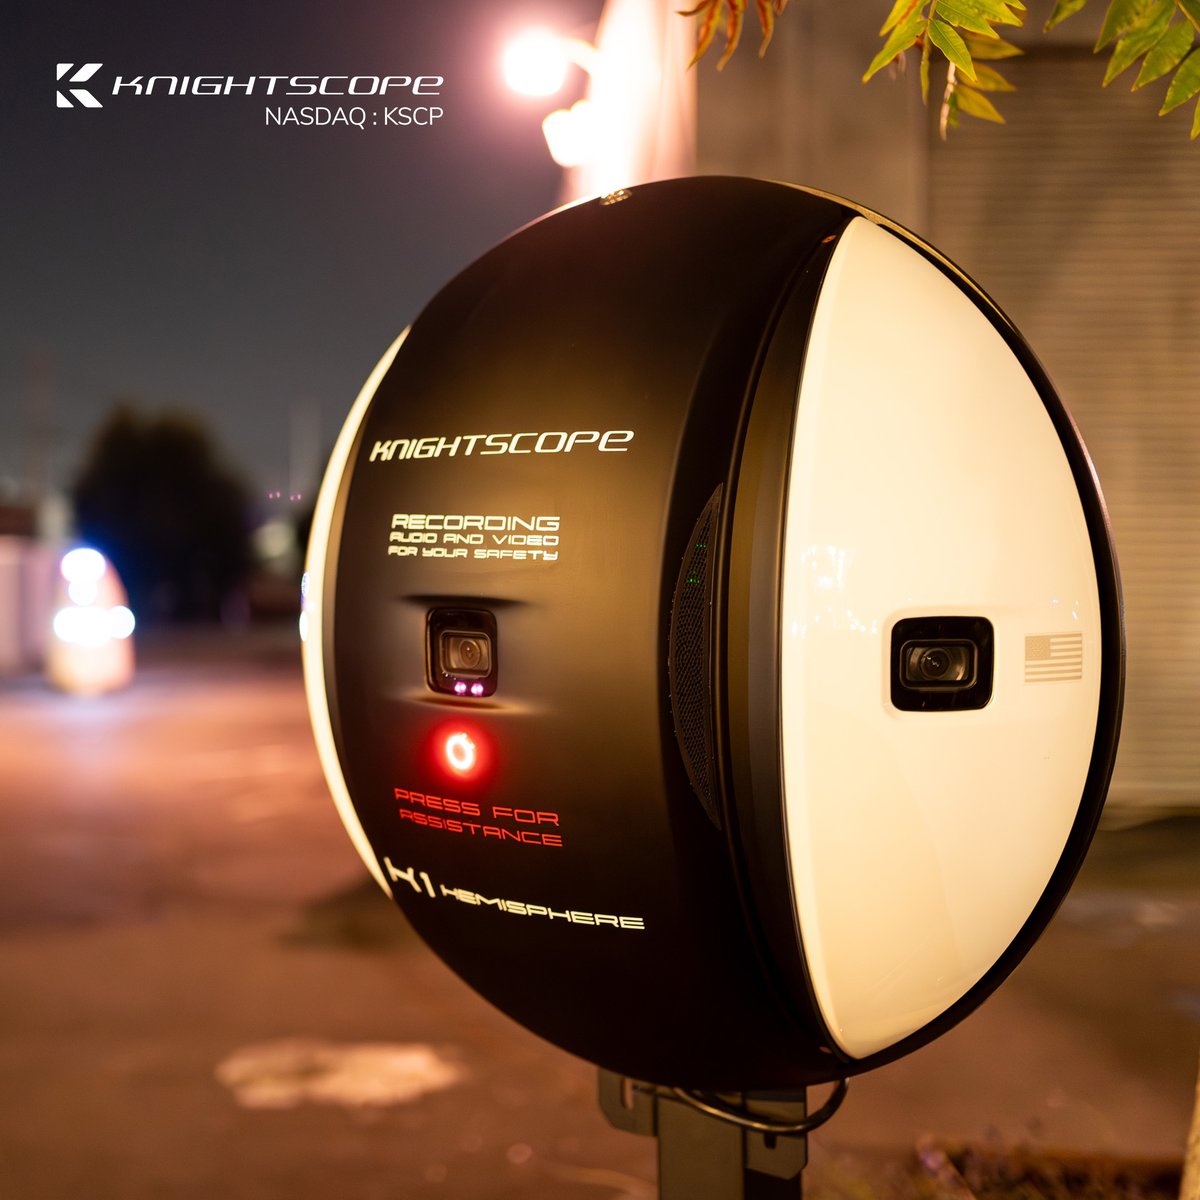 Learn about how the K1 Hemisphere can better secure the places people live, work, study and visit. Chat with our pros by scheduling some time here: knightscope.com/discover